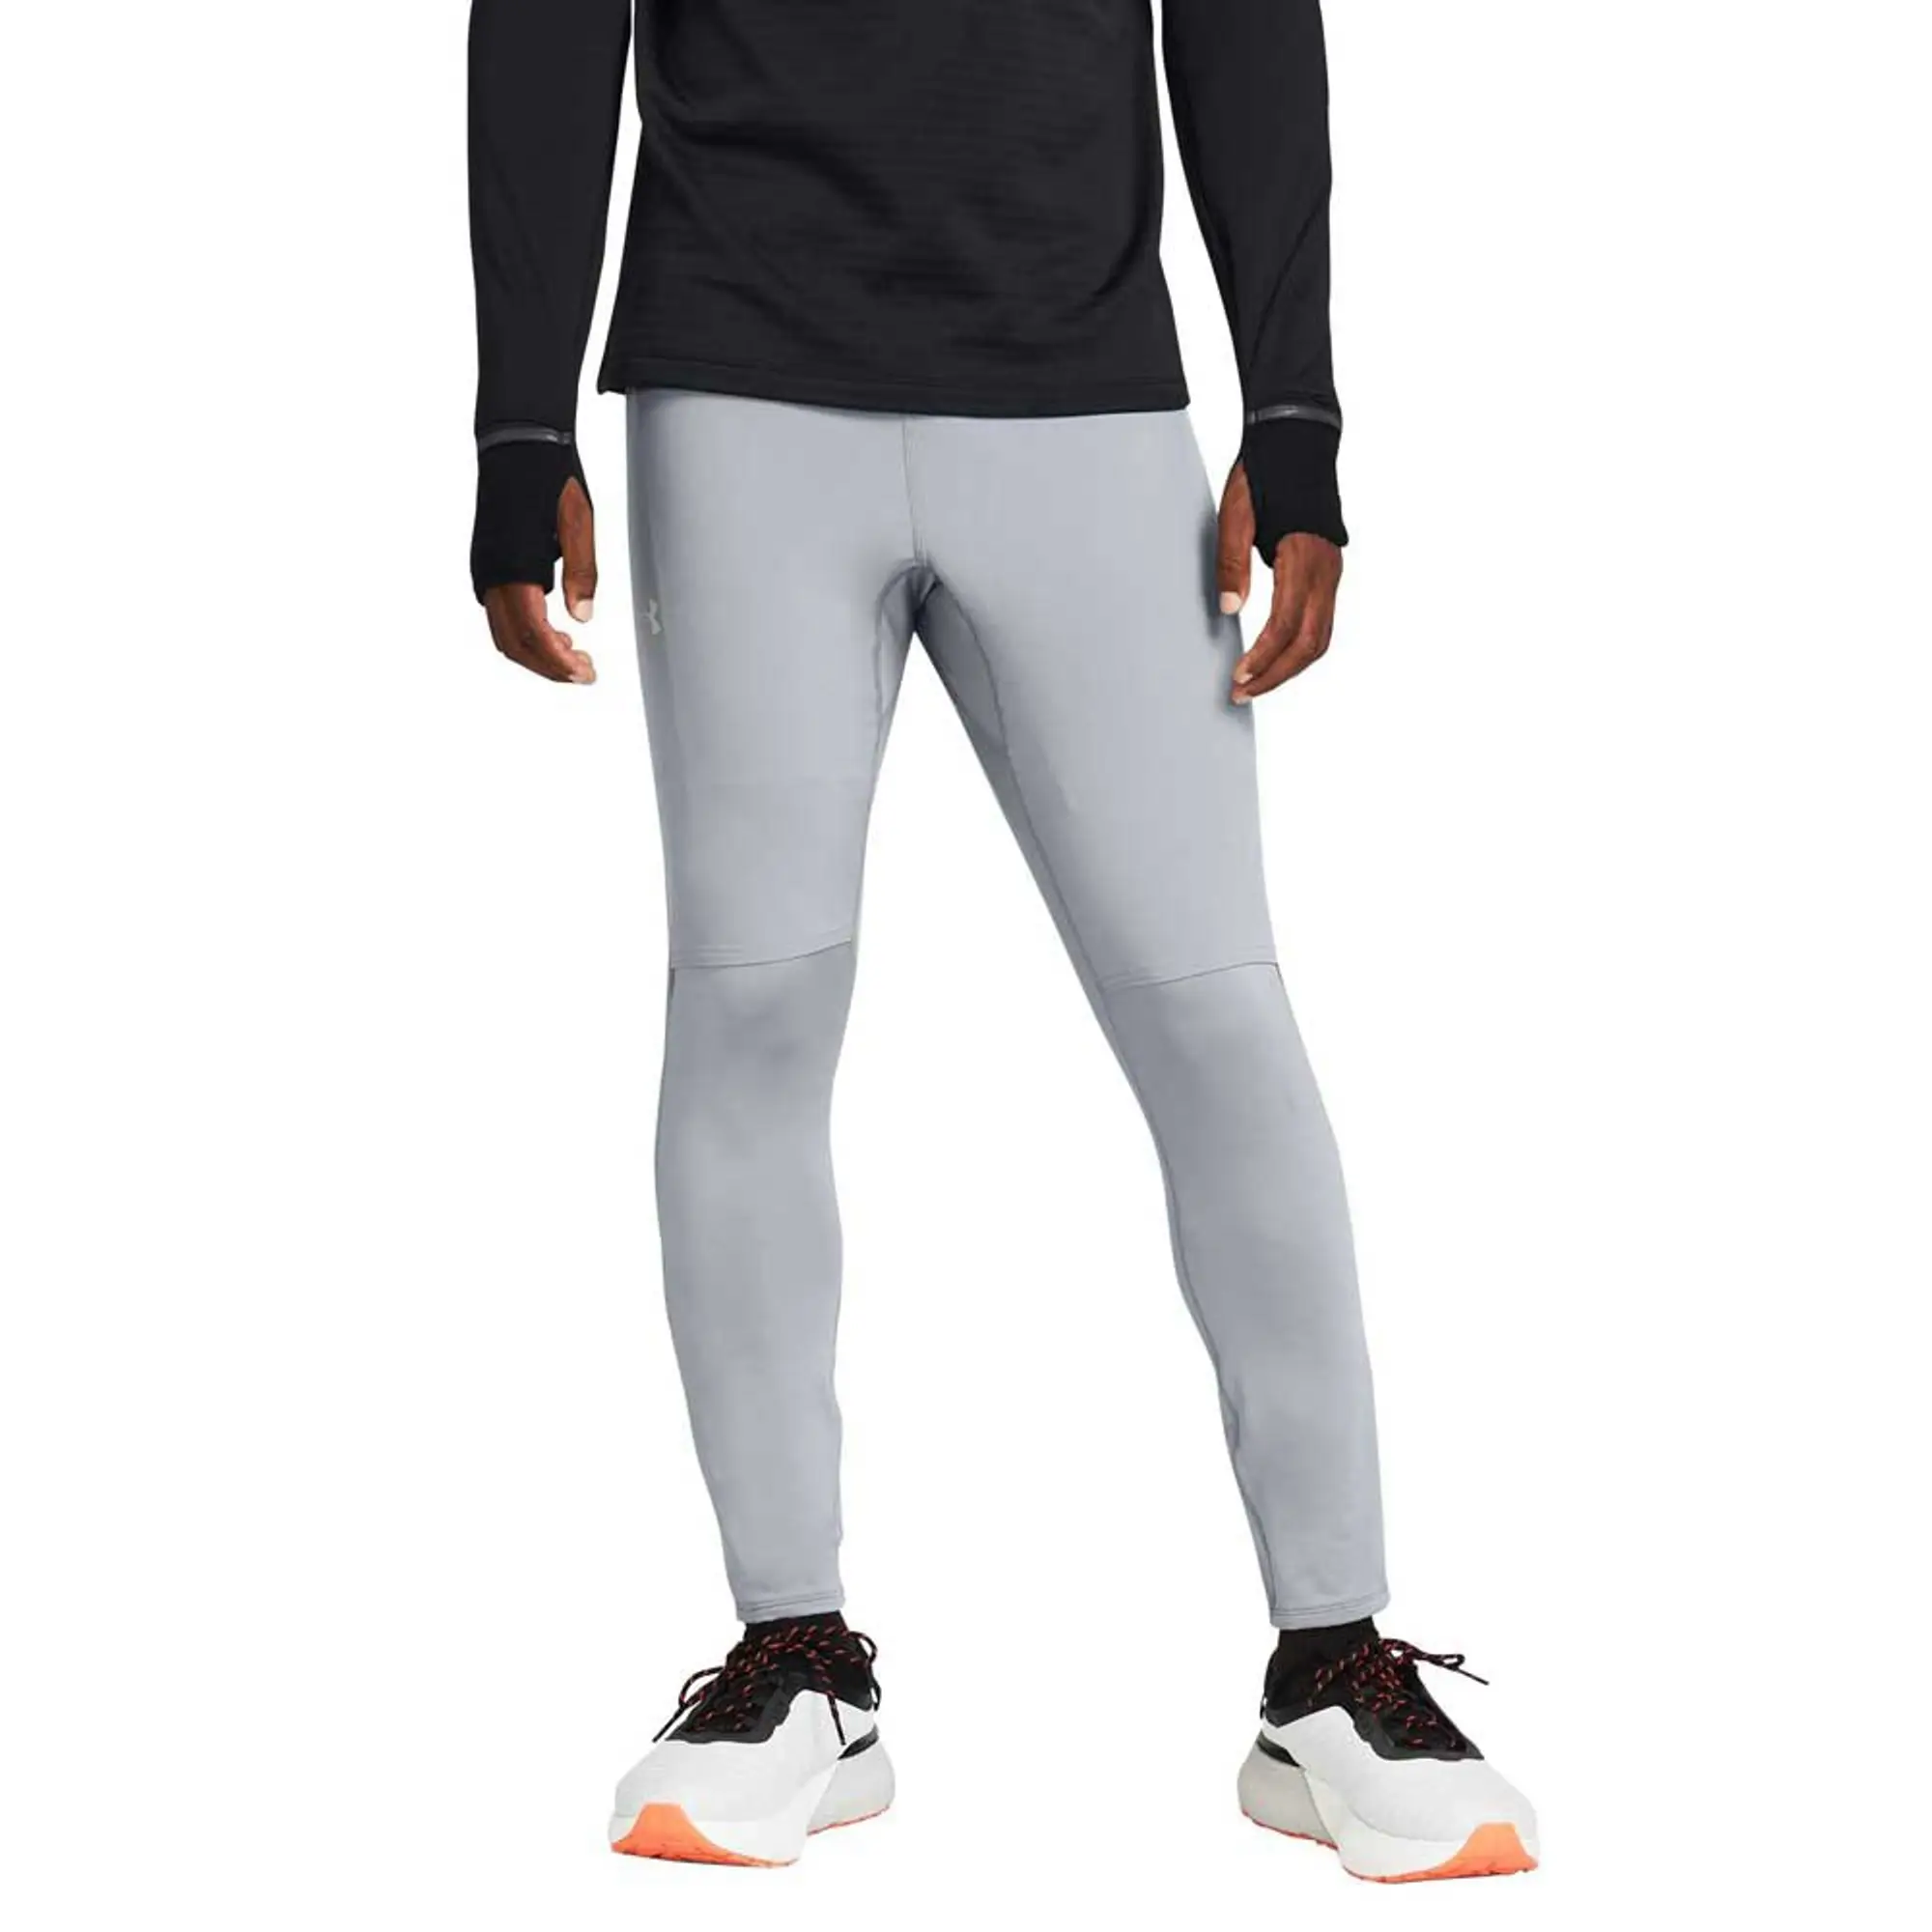 Men's  Under Armour  Q Under Armour lifier Elite Cold Tights Steel / Team Royal / Reflective